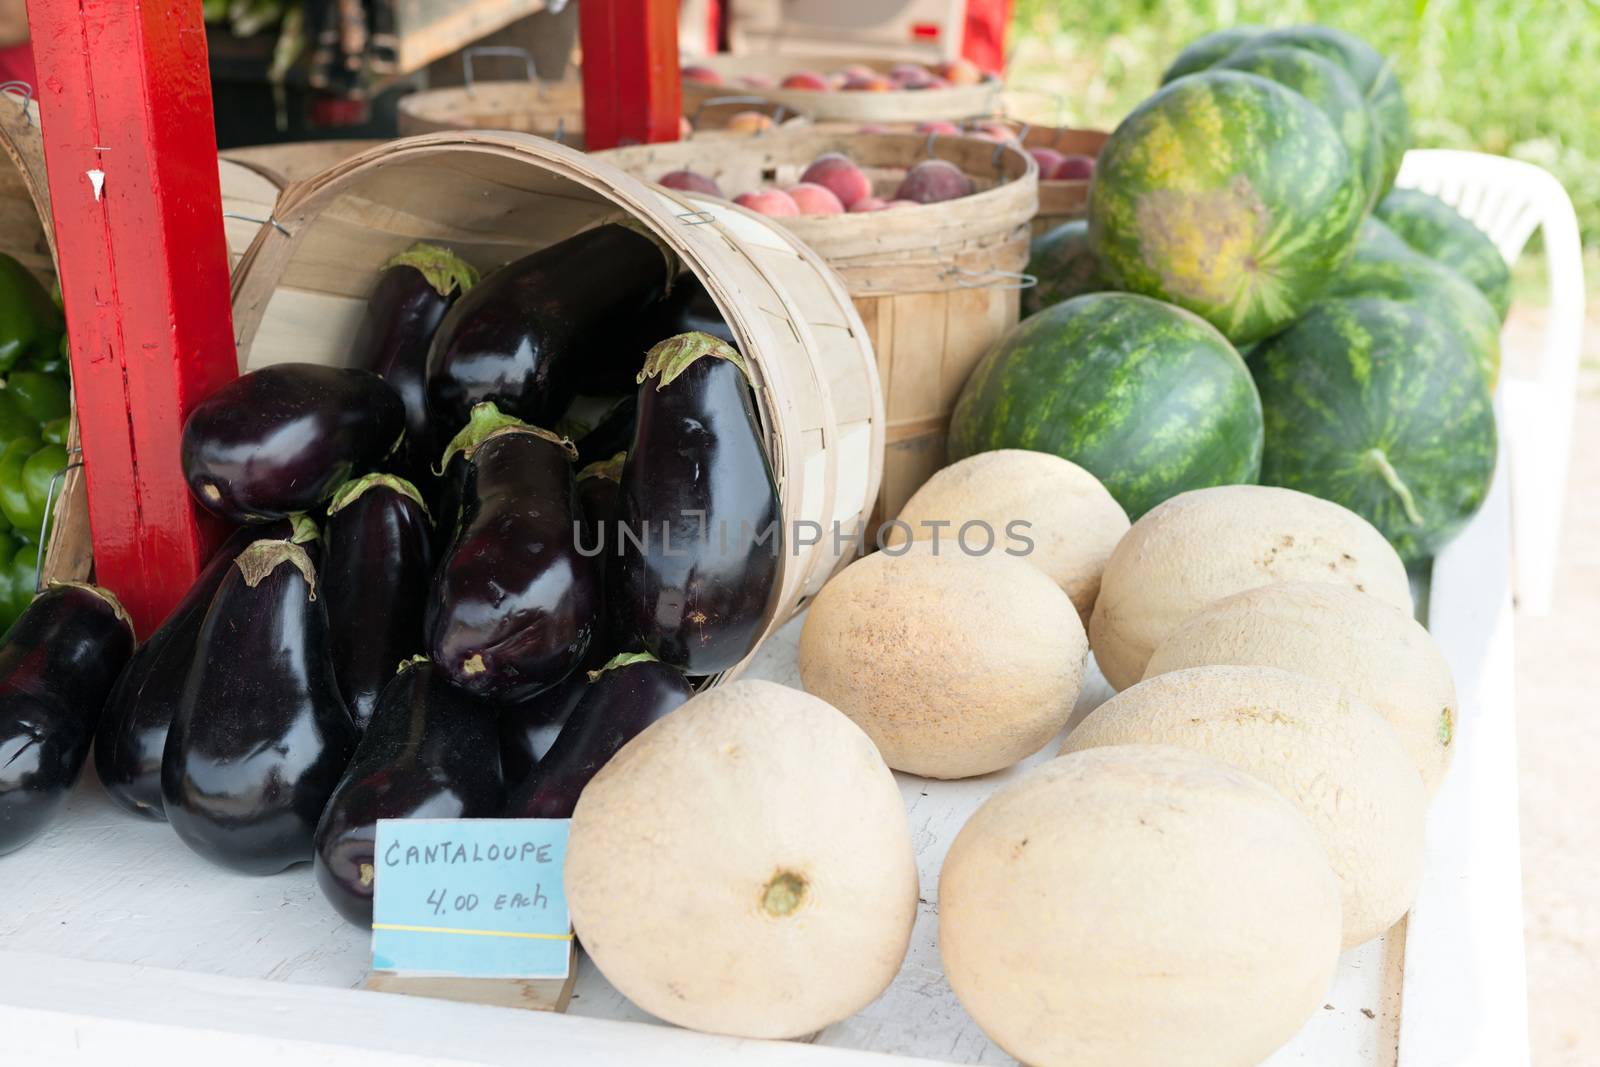 Fresh melons for sale at a farm stand along with some fresh eggplants.  Shallow depth of field.